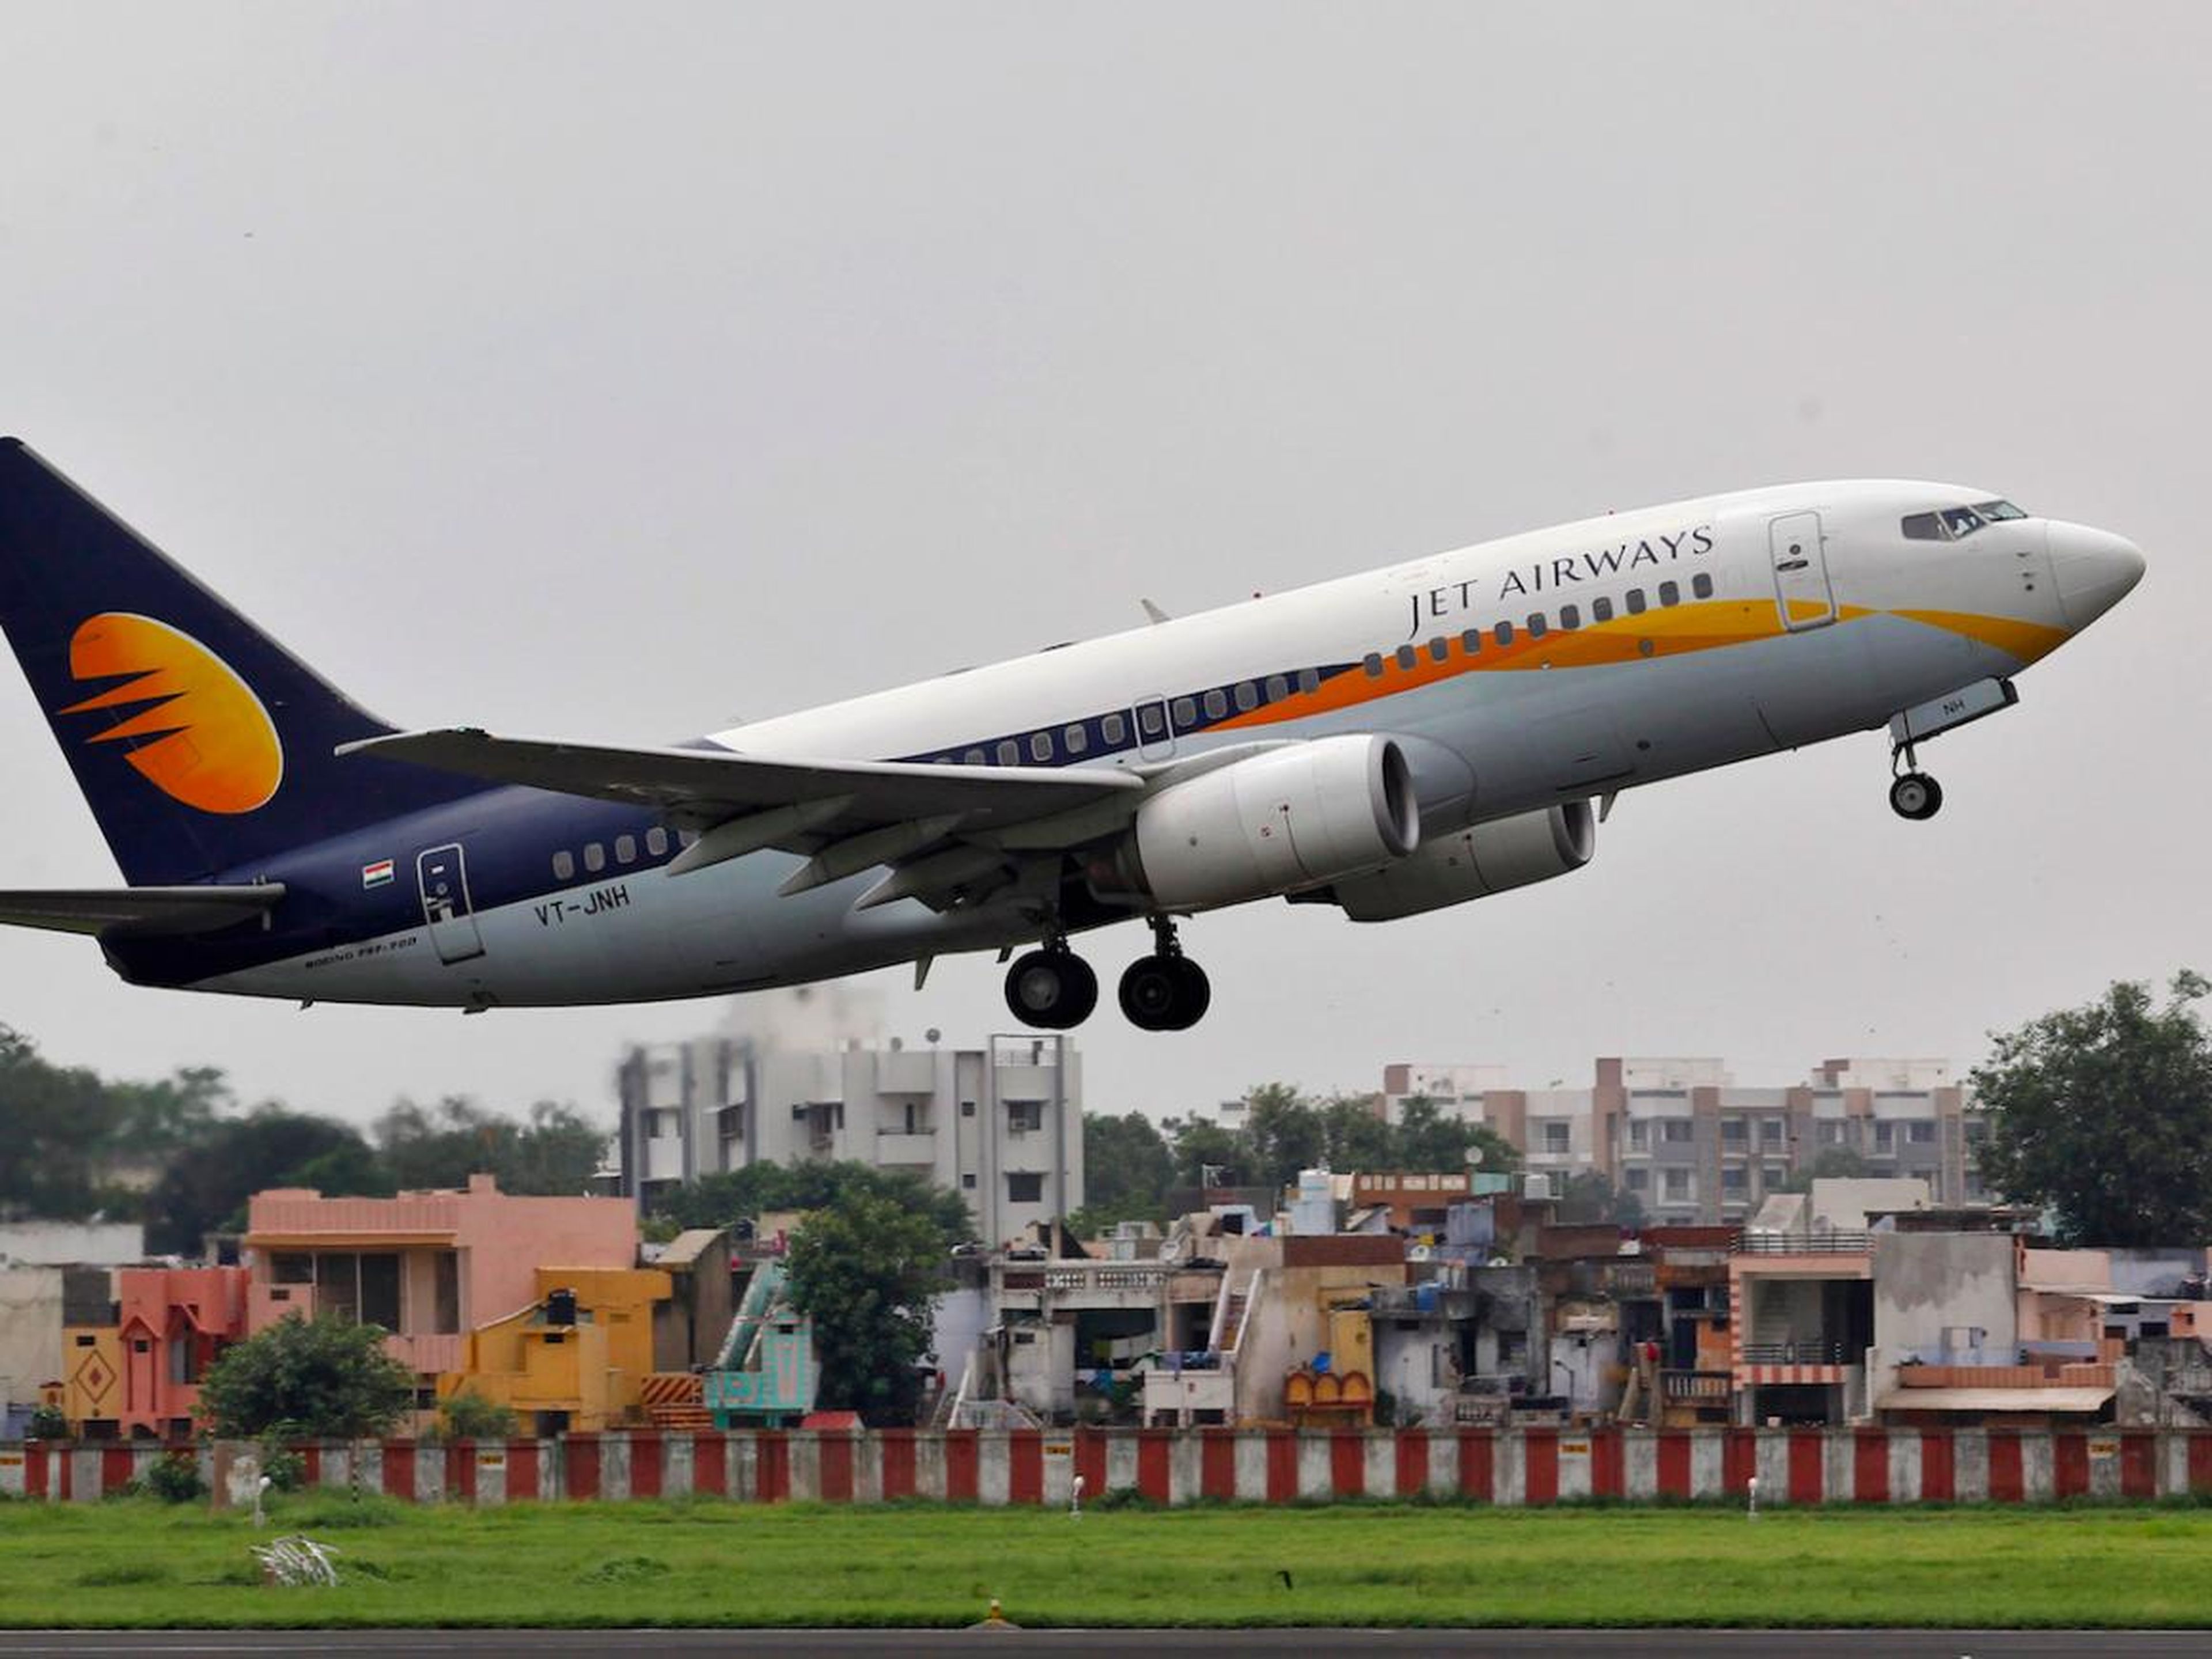 Passengers on a Jet Airways flight ended up with bloody ears and noses after pilots forgot to pressurize the plane (September)